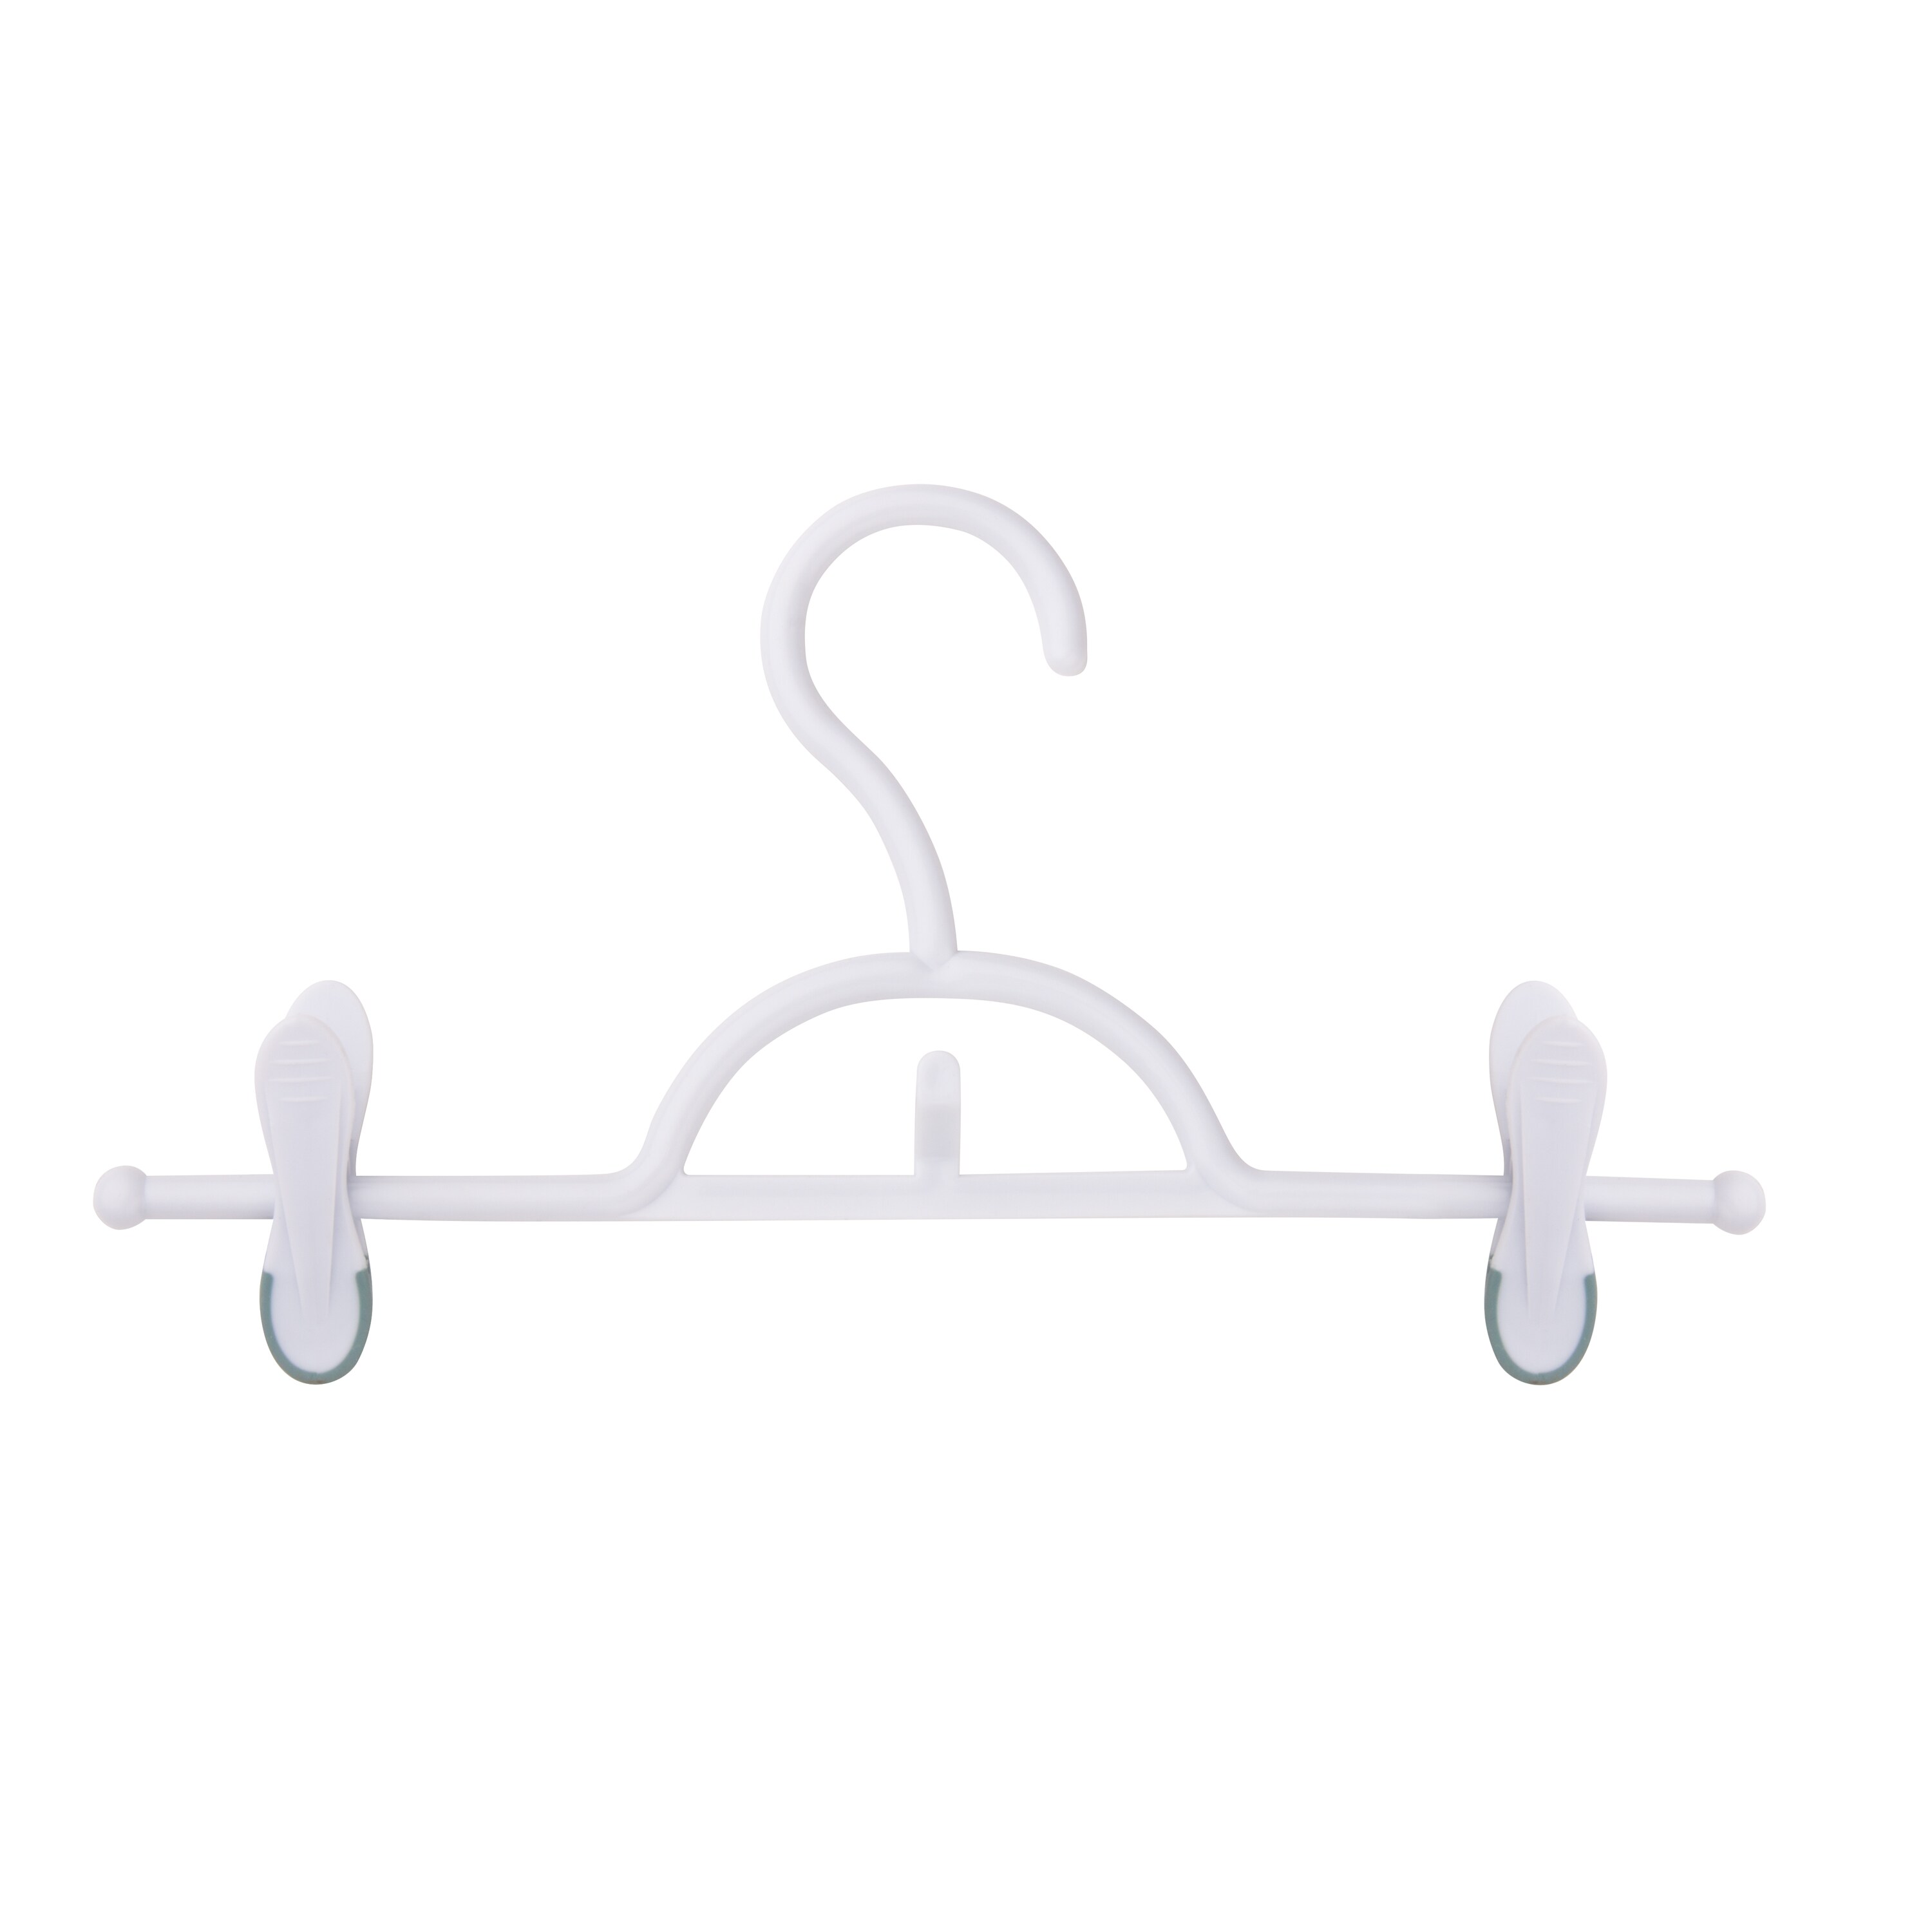 Honey-Can-Do Heavy-Duty Plastic Clothes Hangers, White, 18/Pack (HNG-09023)